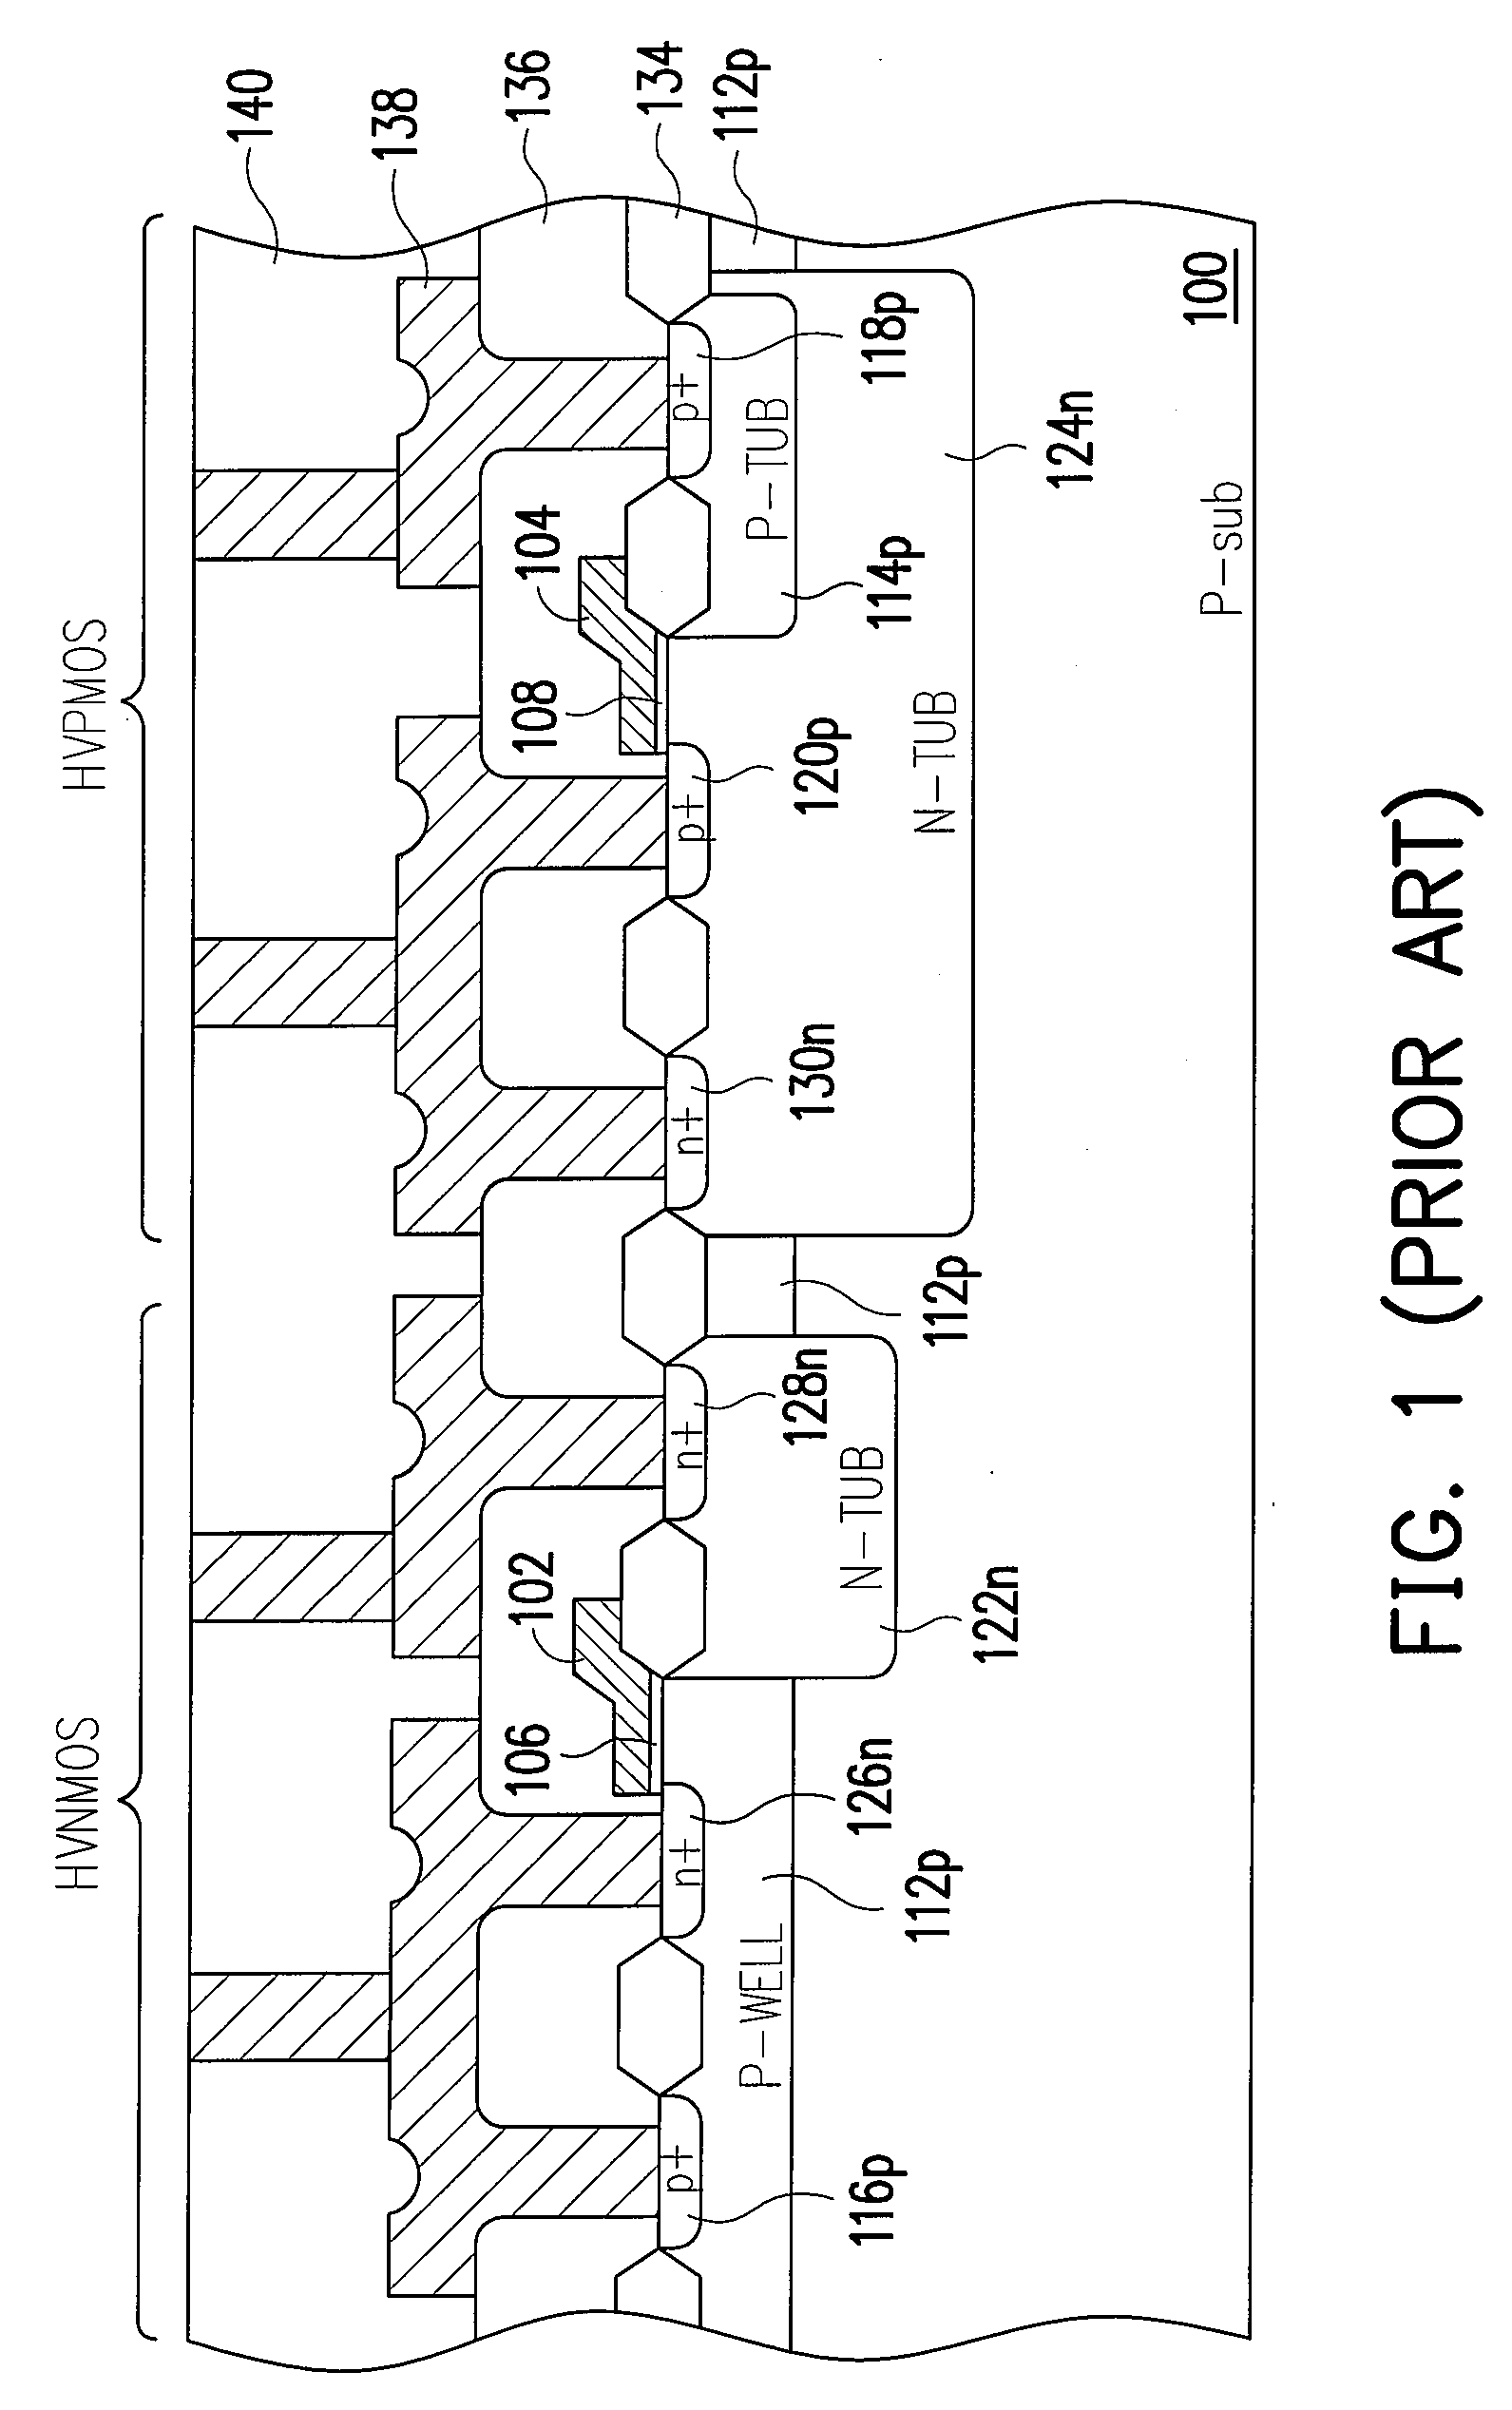 Semiconductor device and complementary metal-oxide-semiconductor field effect transistor